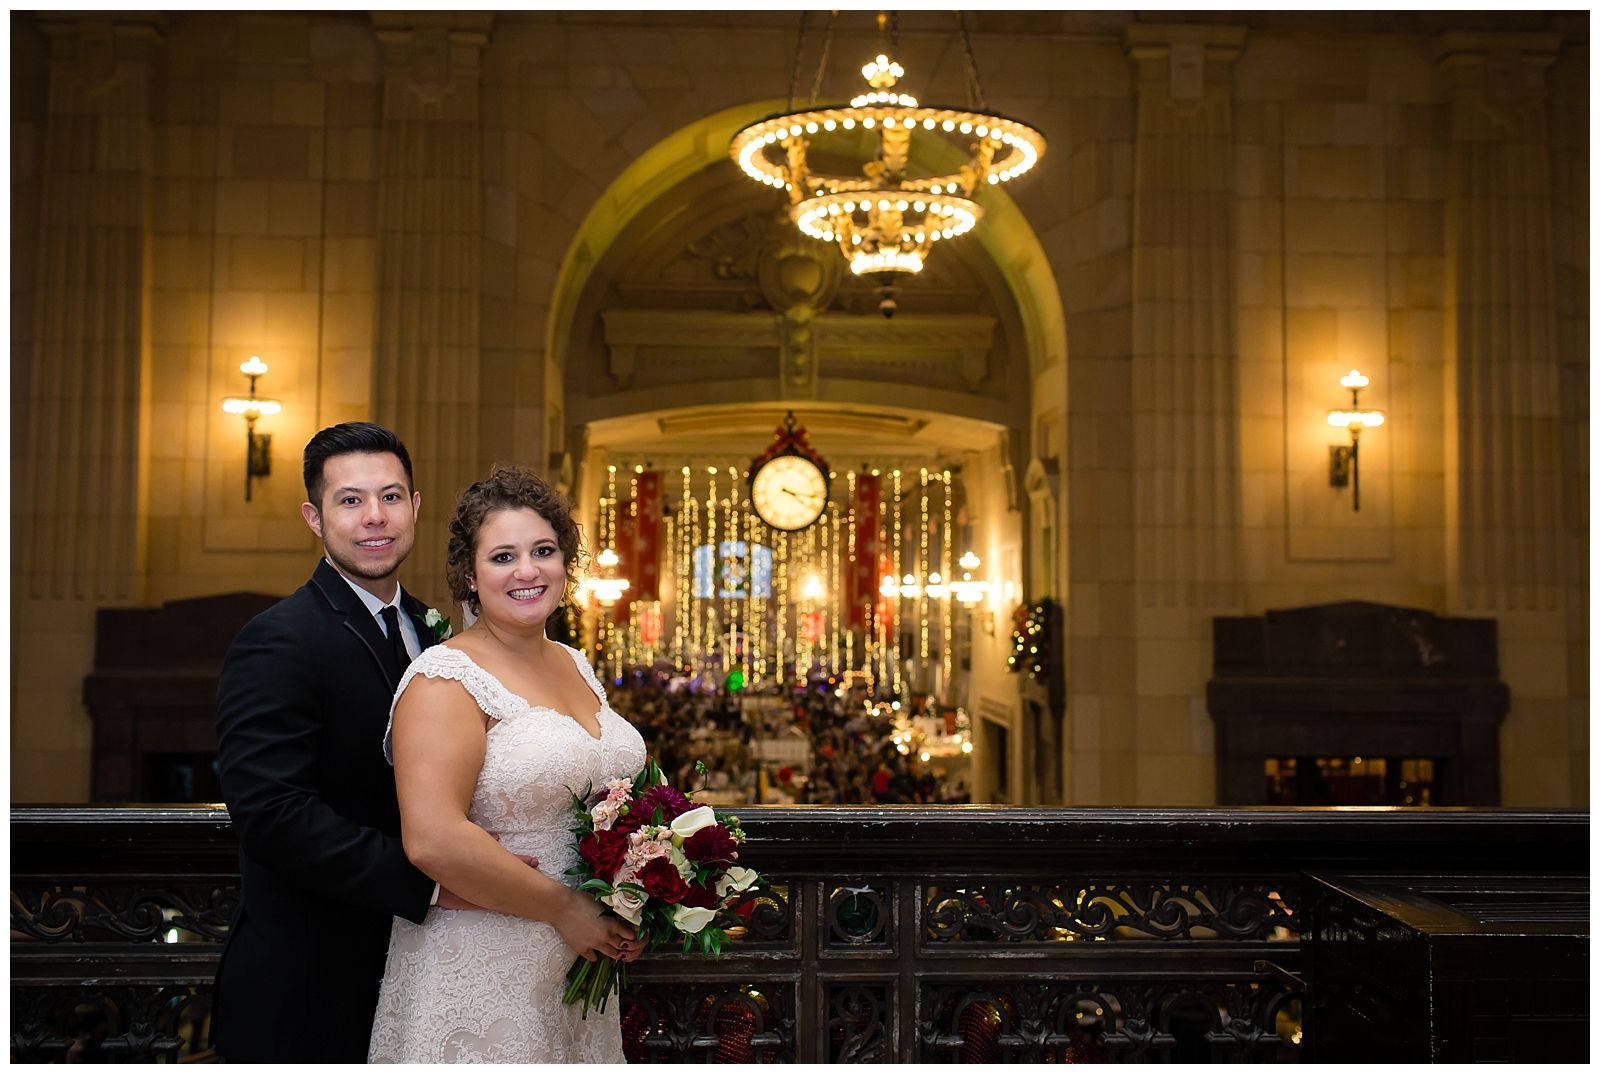 Wedding photography at Union Station by Kansas City wedding photographers Wisdom-Watson Weddings.